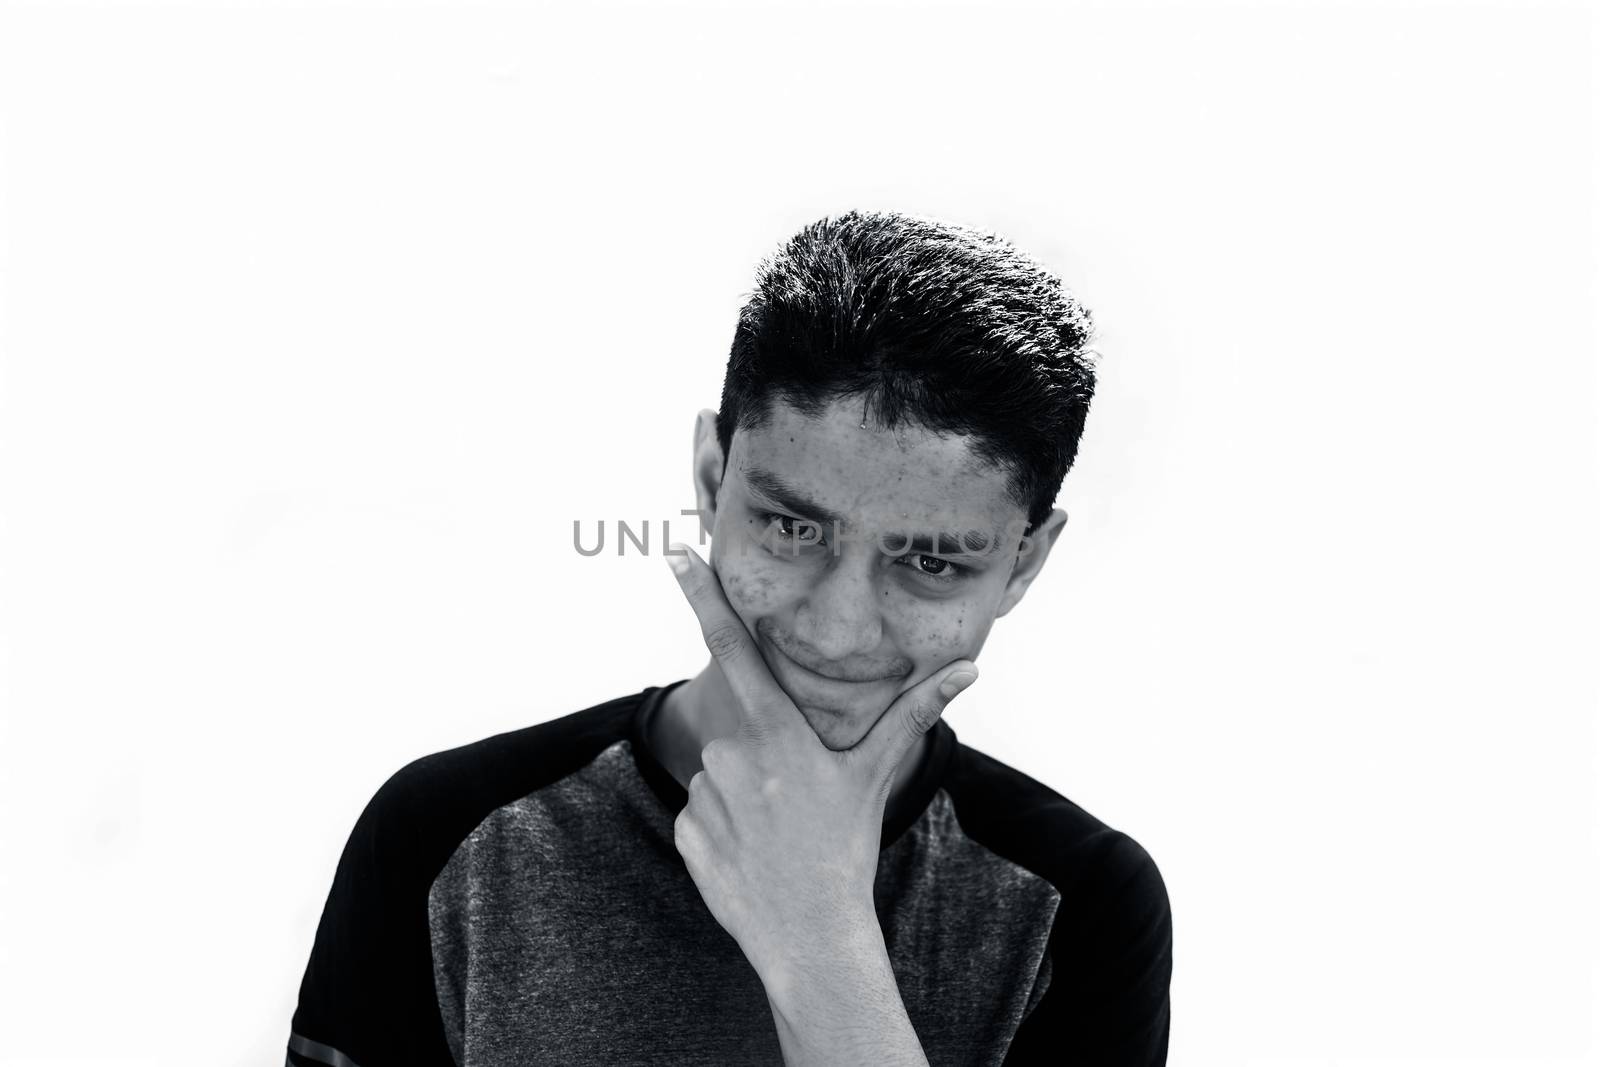 Portrait shot of young teenager or youngster isolated on white expressing some doubtfulness on his face wearing a Grey and black t shirt. by mirzamlk